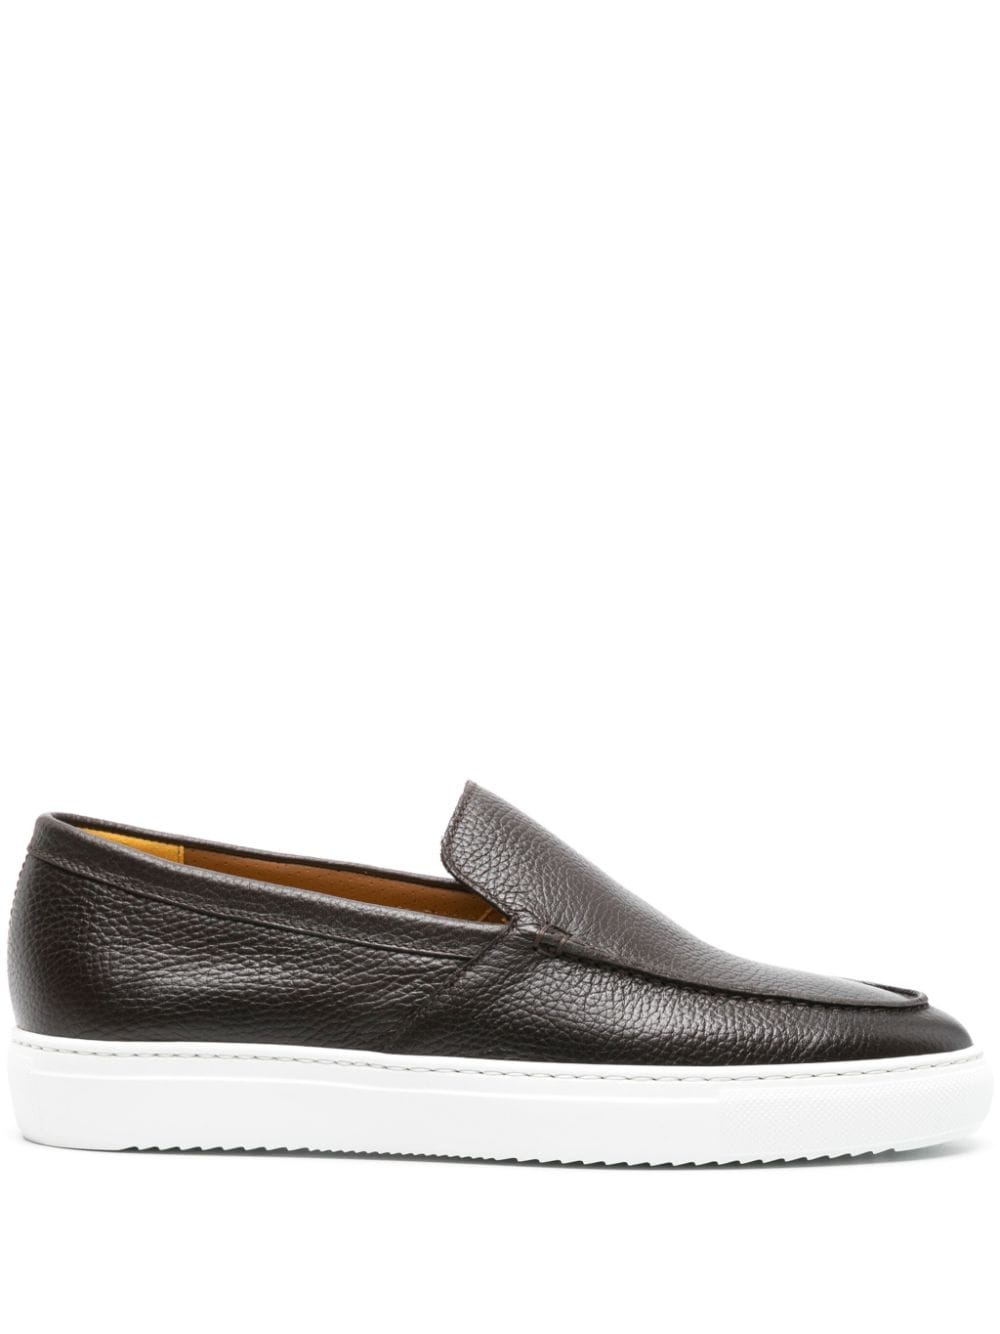 Doucal's slip-on leather loafers - Brown von Doucal's